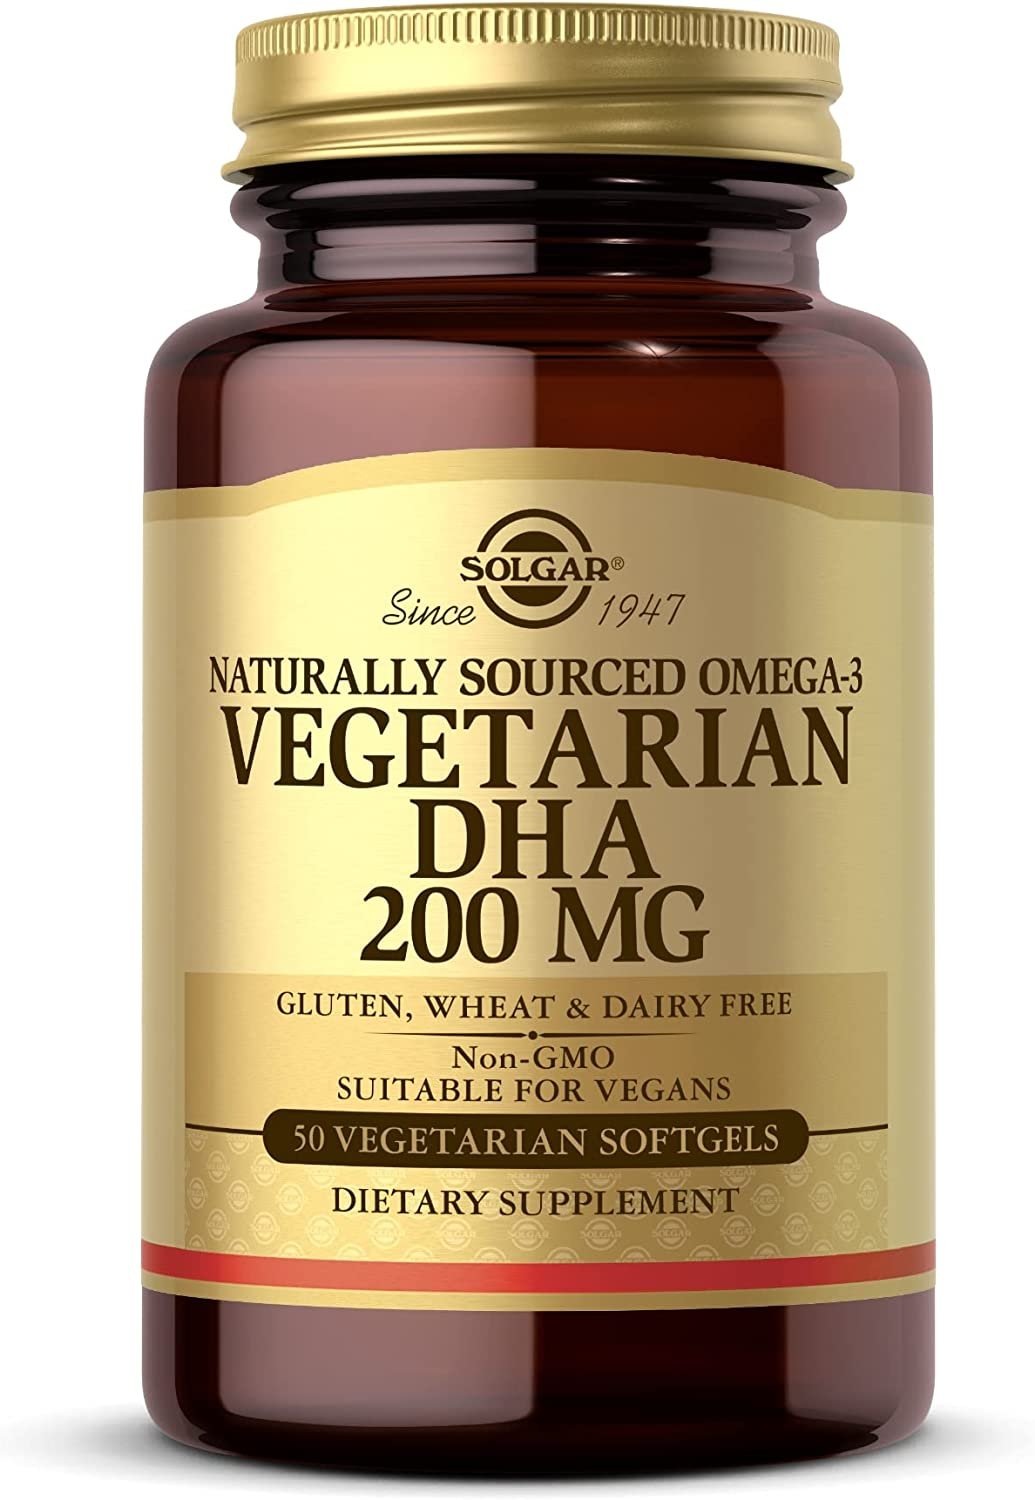 Solgar Omega-3 Vegetarian DHA 200 mg Vegetarian, 50 Softgels - Support for Cardiovascular, Joint & Skin Health - Contains DHA-Rich Algal Oil - Vegan, Gluten Free, Dairy Free - 50 Servings